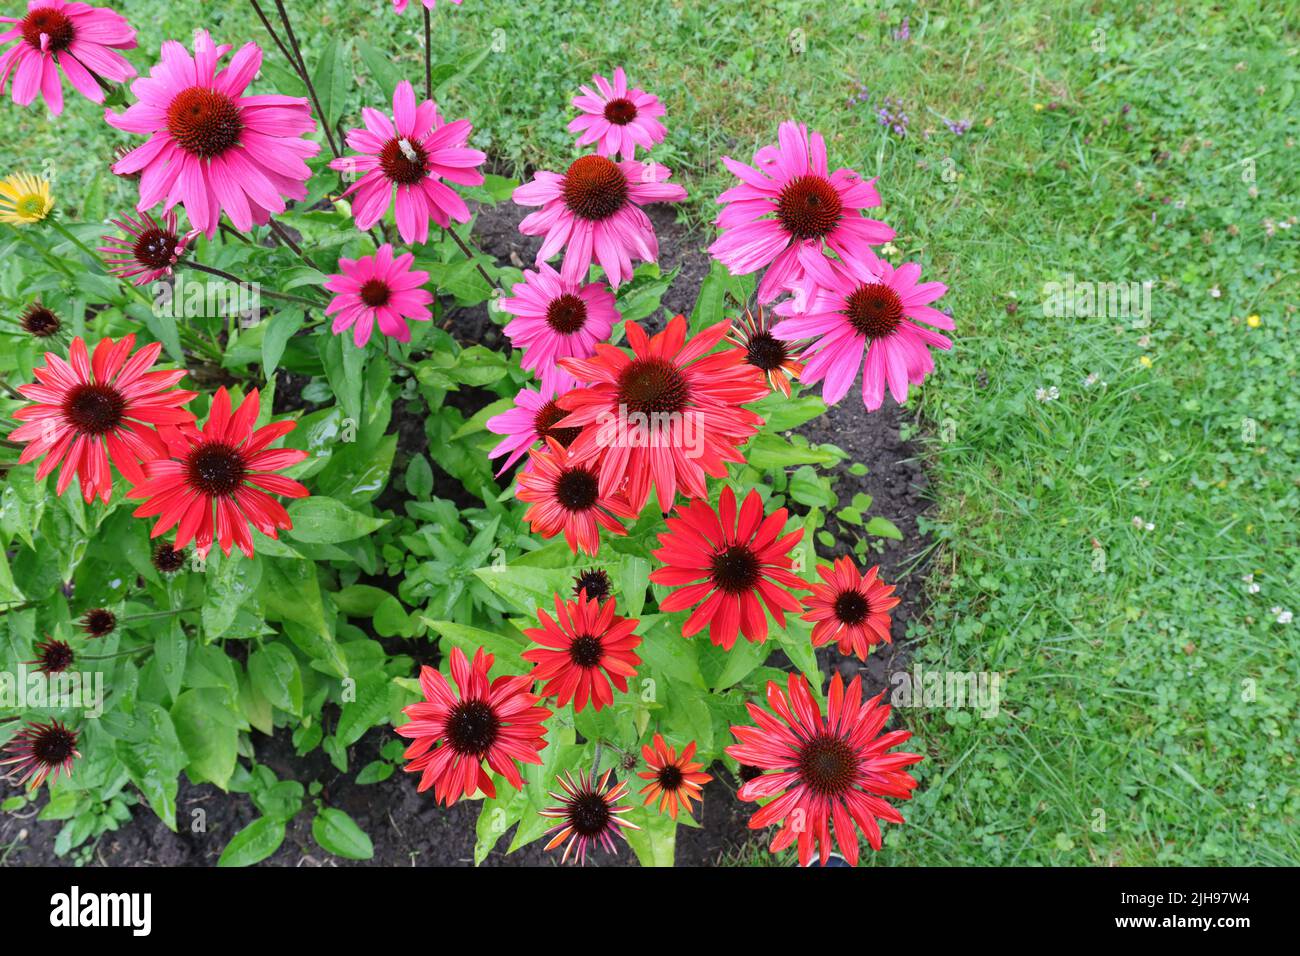 beautiful red and pink echinacea purpurea flowers in a flower bed Stock Photo